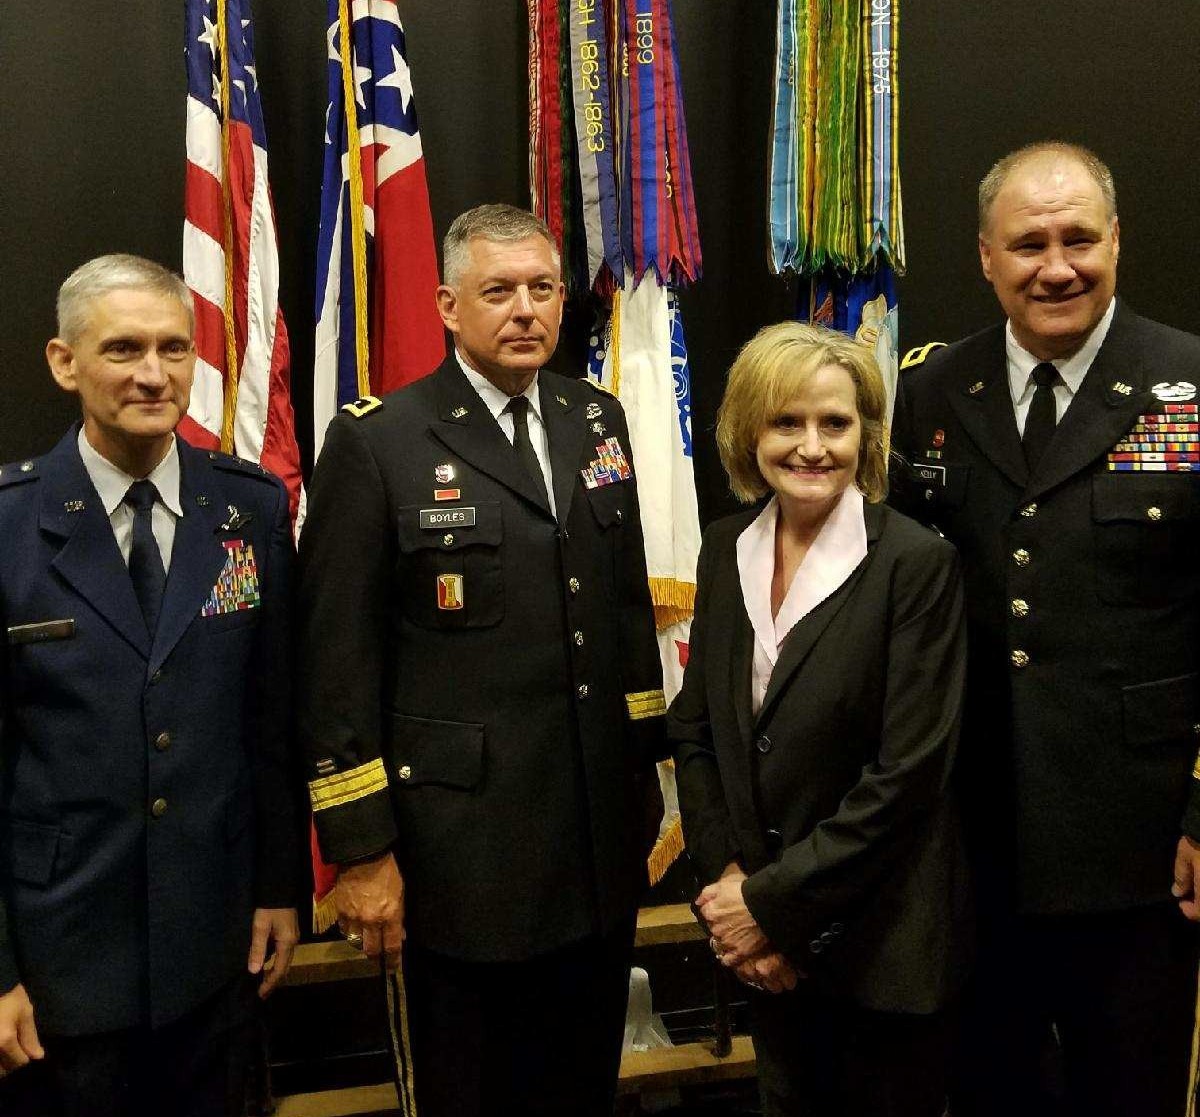 Senator Hyde-Smith joins Maj. Gen. William Hill, Maj. Gen. Janson D. Boyles, and Rep. Trent Kelly at the Mississippi National Guard Convention in Biloxi